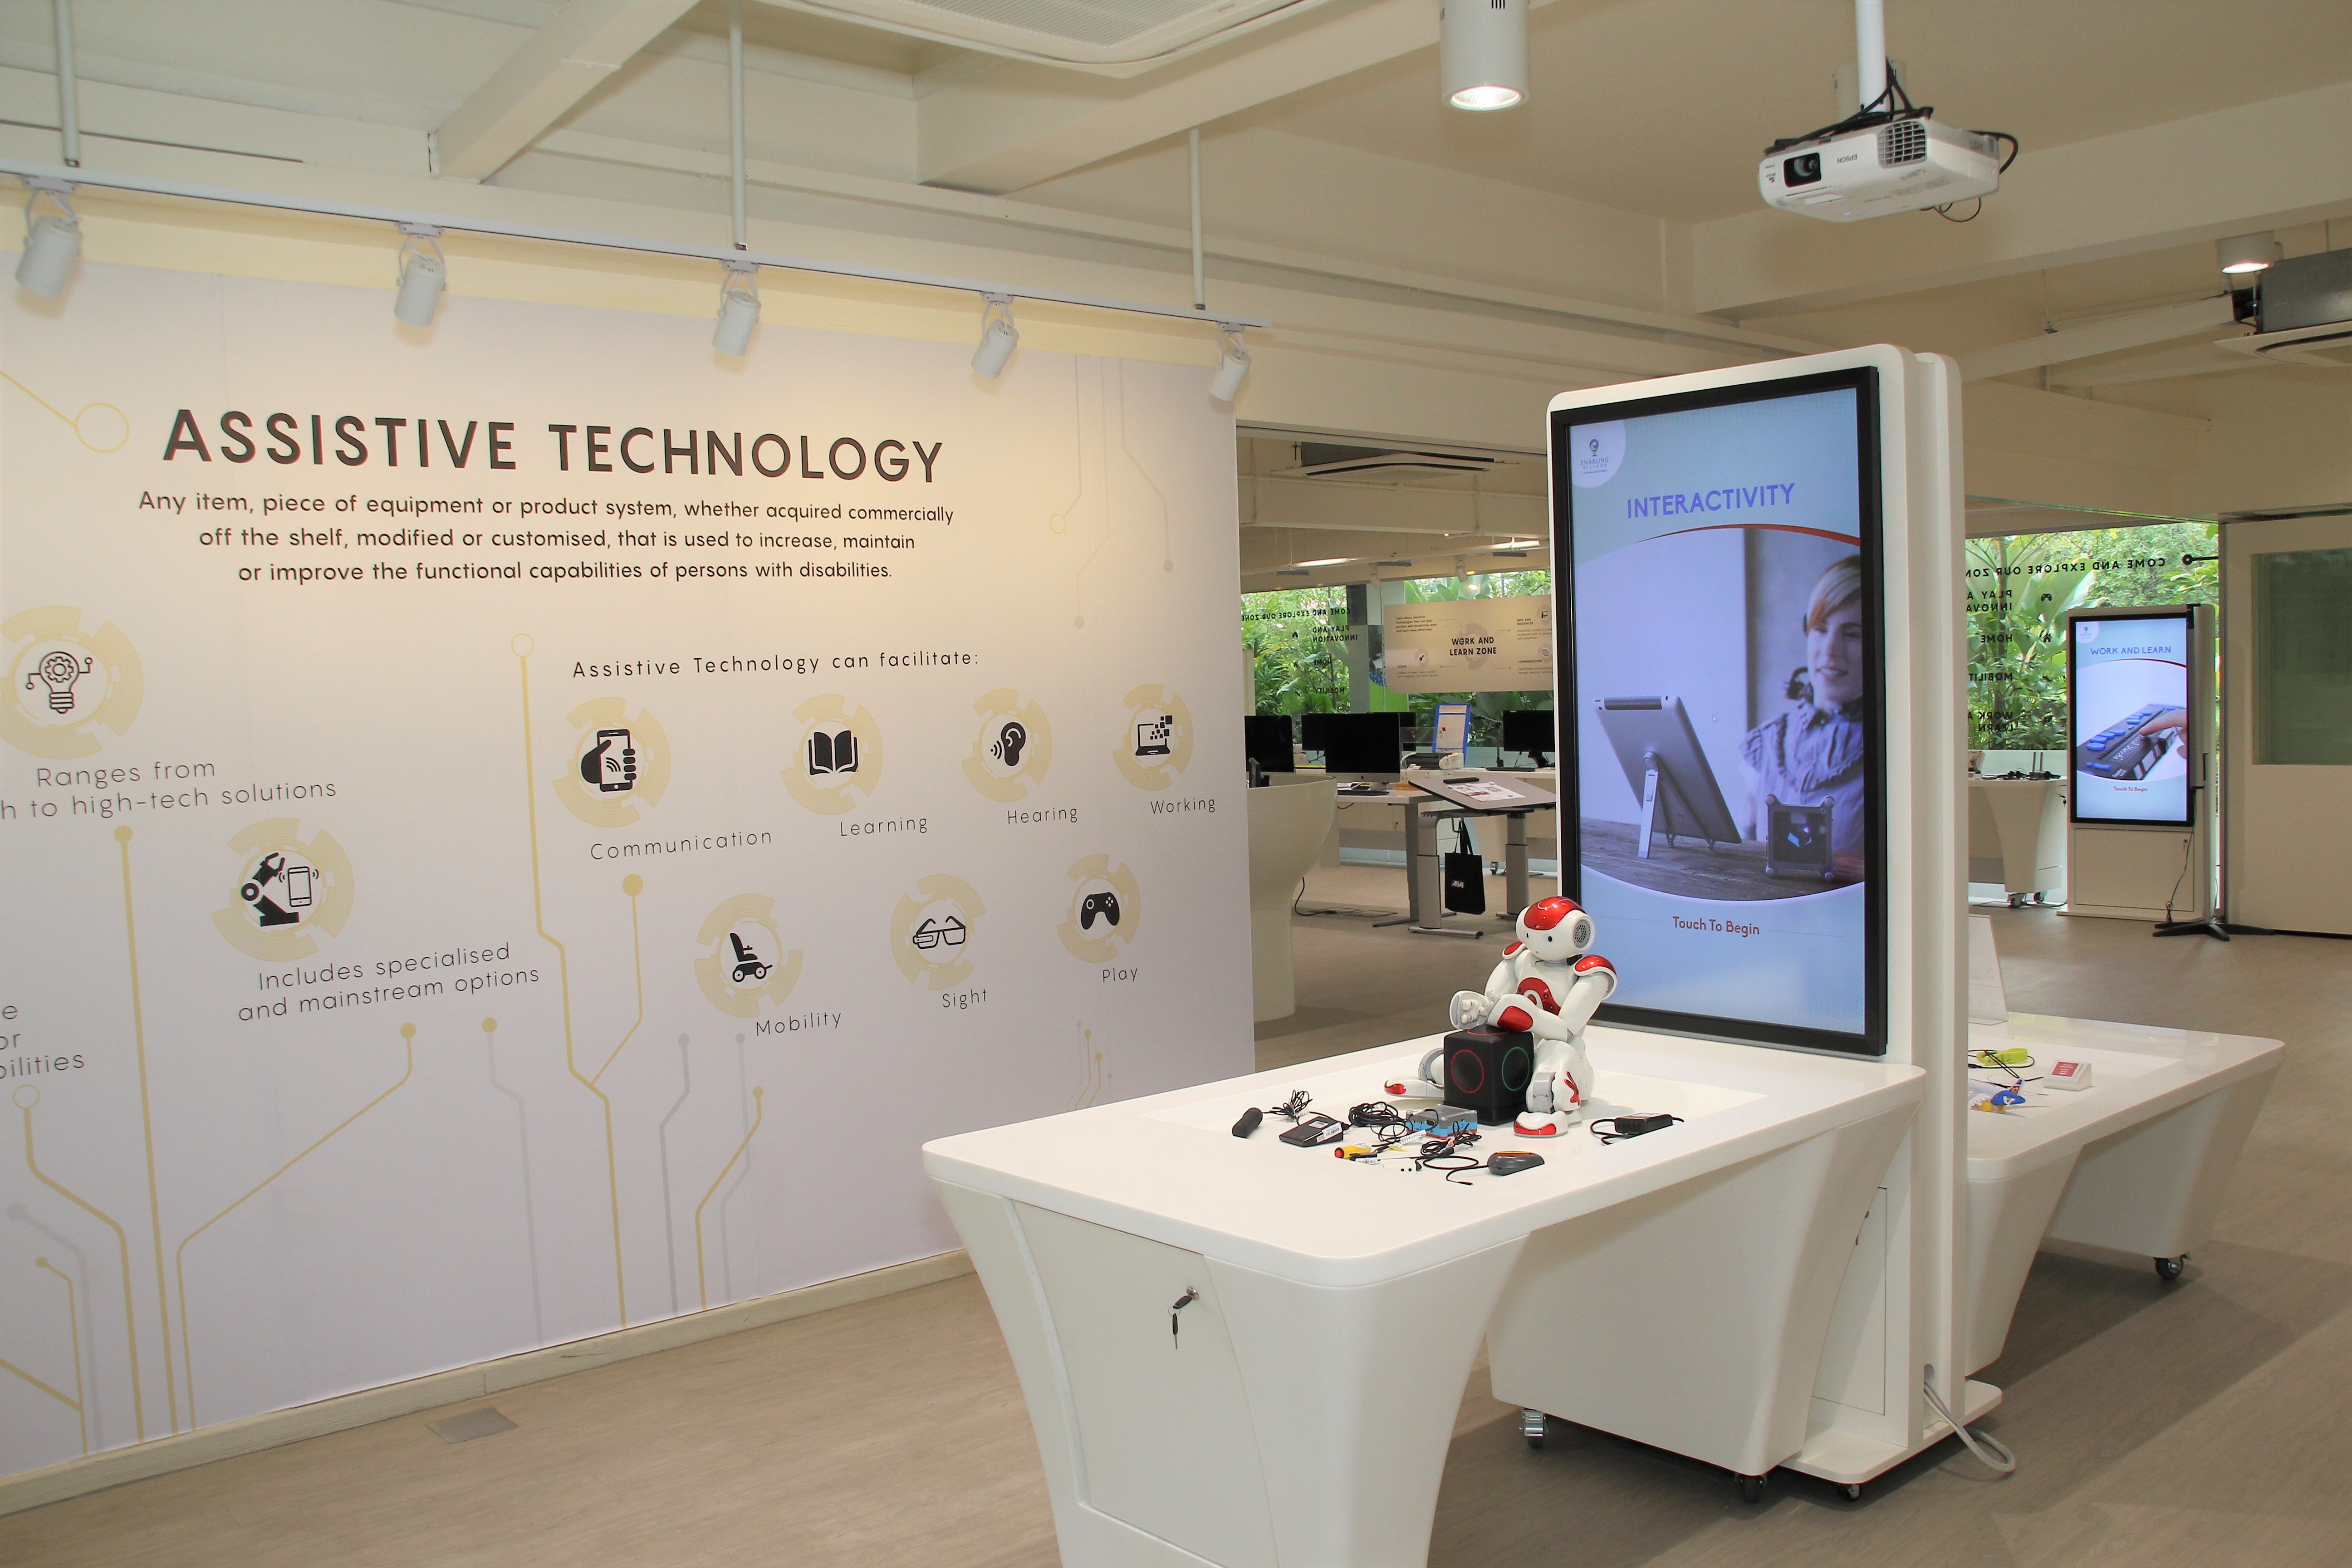 Interior of Tech Able showing digital screens and some assistive technology devices on display like a robot for self-exploration.